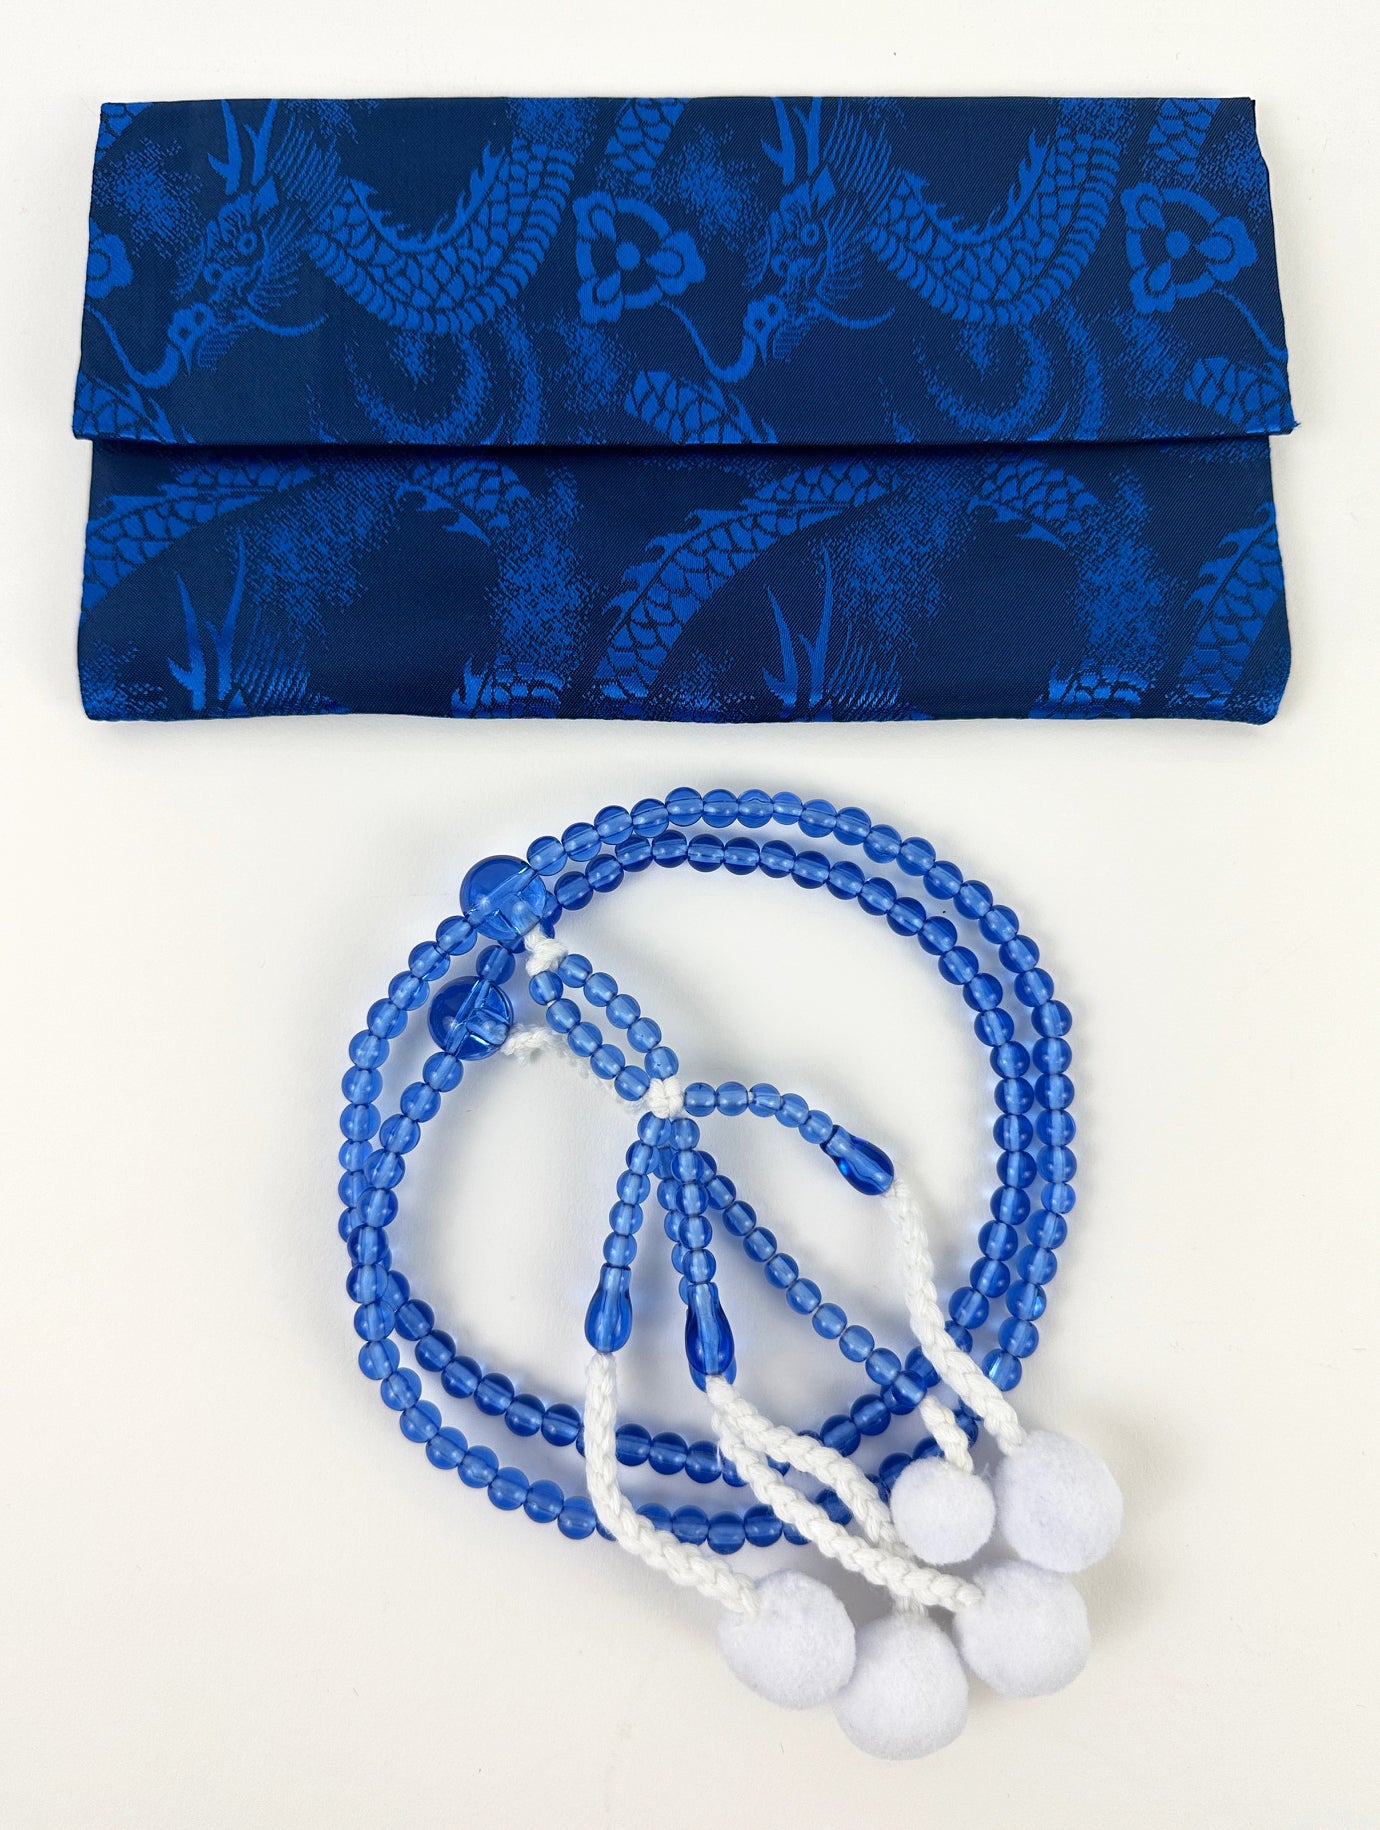 Sapphire Blue Beads Set - Large Beads (Large Beads Case)